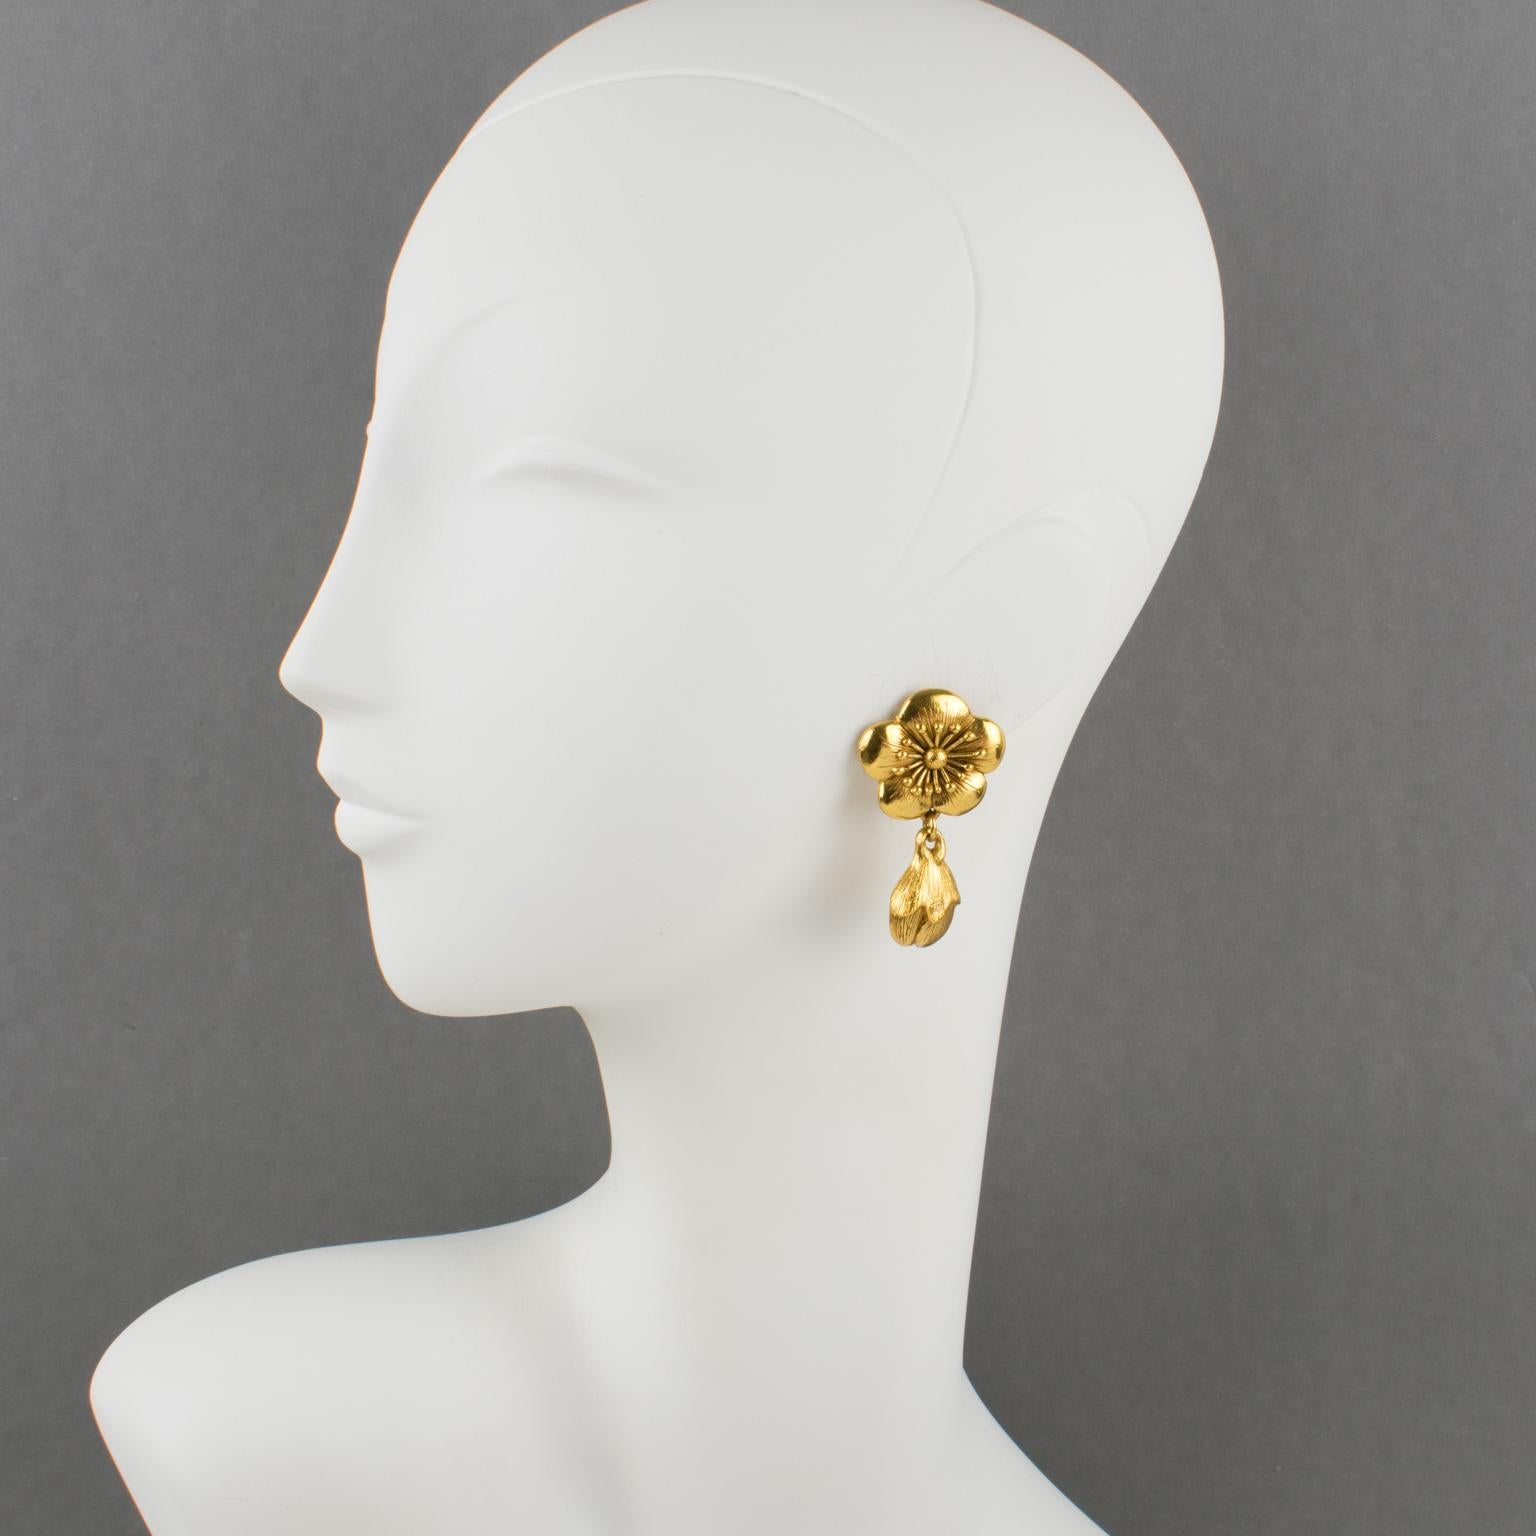 These lovely Kenzo Paris floral clip-on earrings feature a dangling drop shape with gilt metal, all carved and textured. The design is cherry blossom flowers and buds. Marked underside 